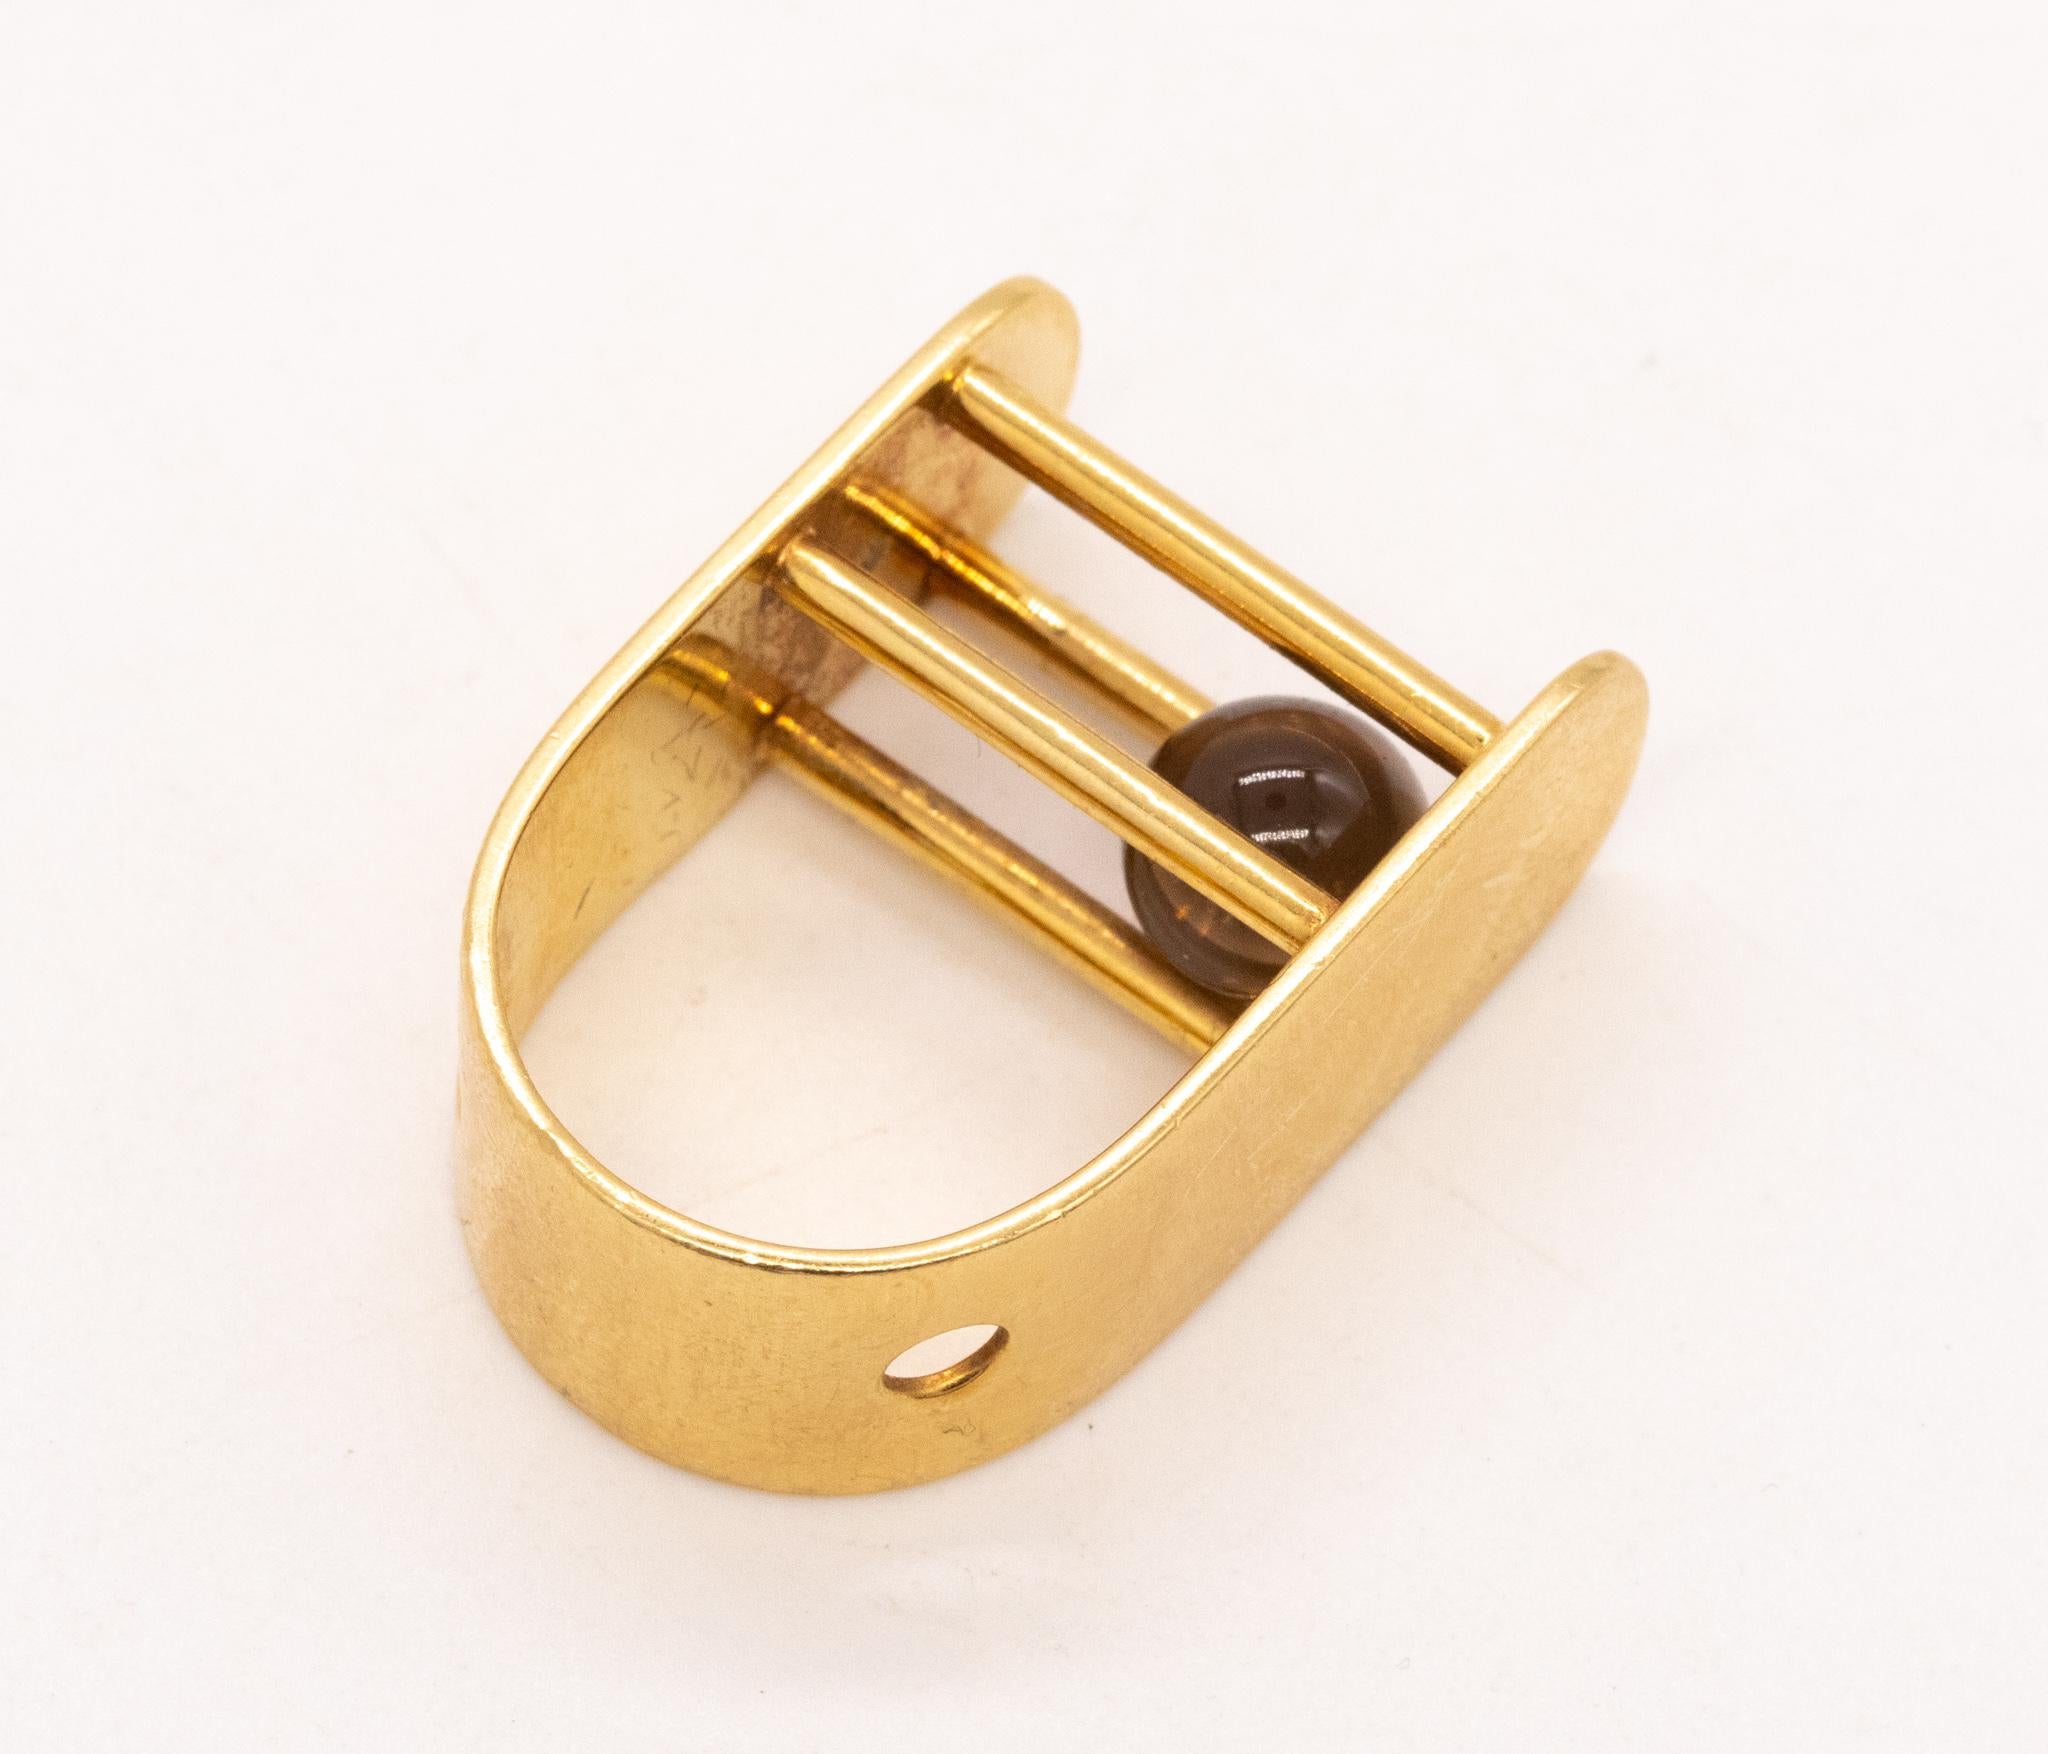 Yael Sonia Brazil Kinetic Sculptural Ring In 18Kt Yellow Gold With White Quartz For Sale 2